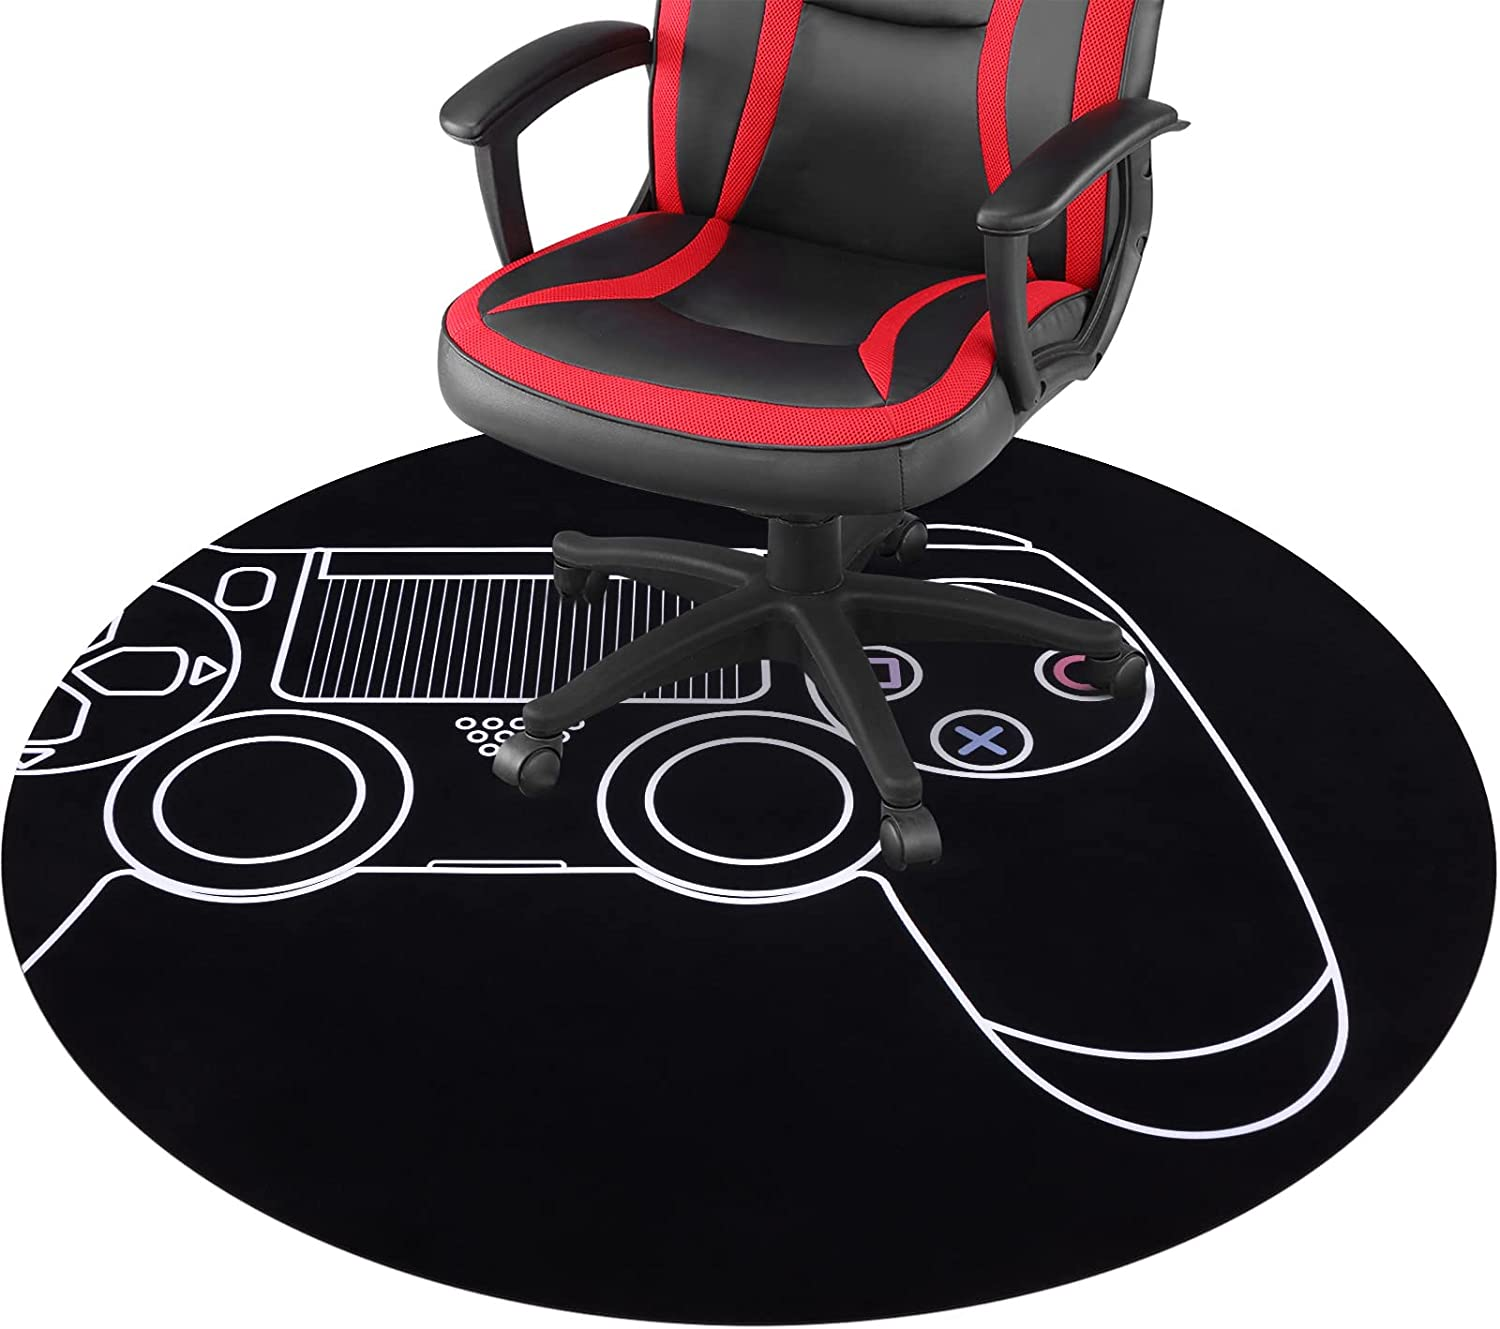 If a gaming chair has wheels that cannot roll smoothly on a carpet simply use a durable mat under the gaming chair.